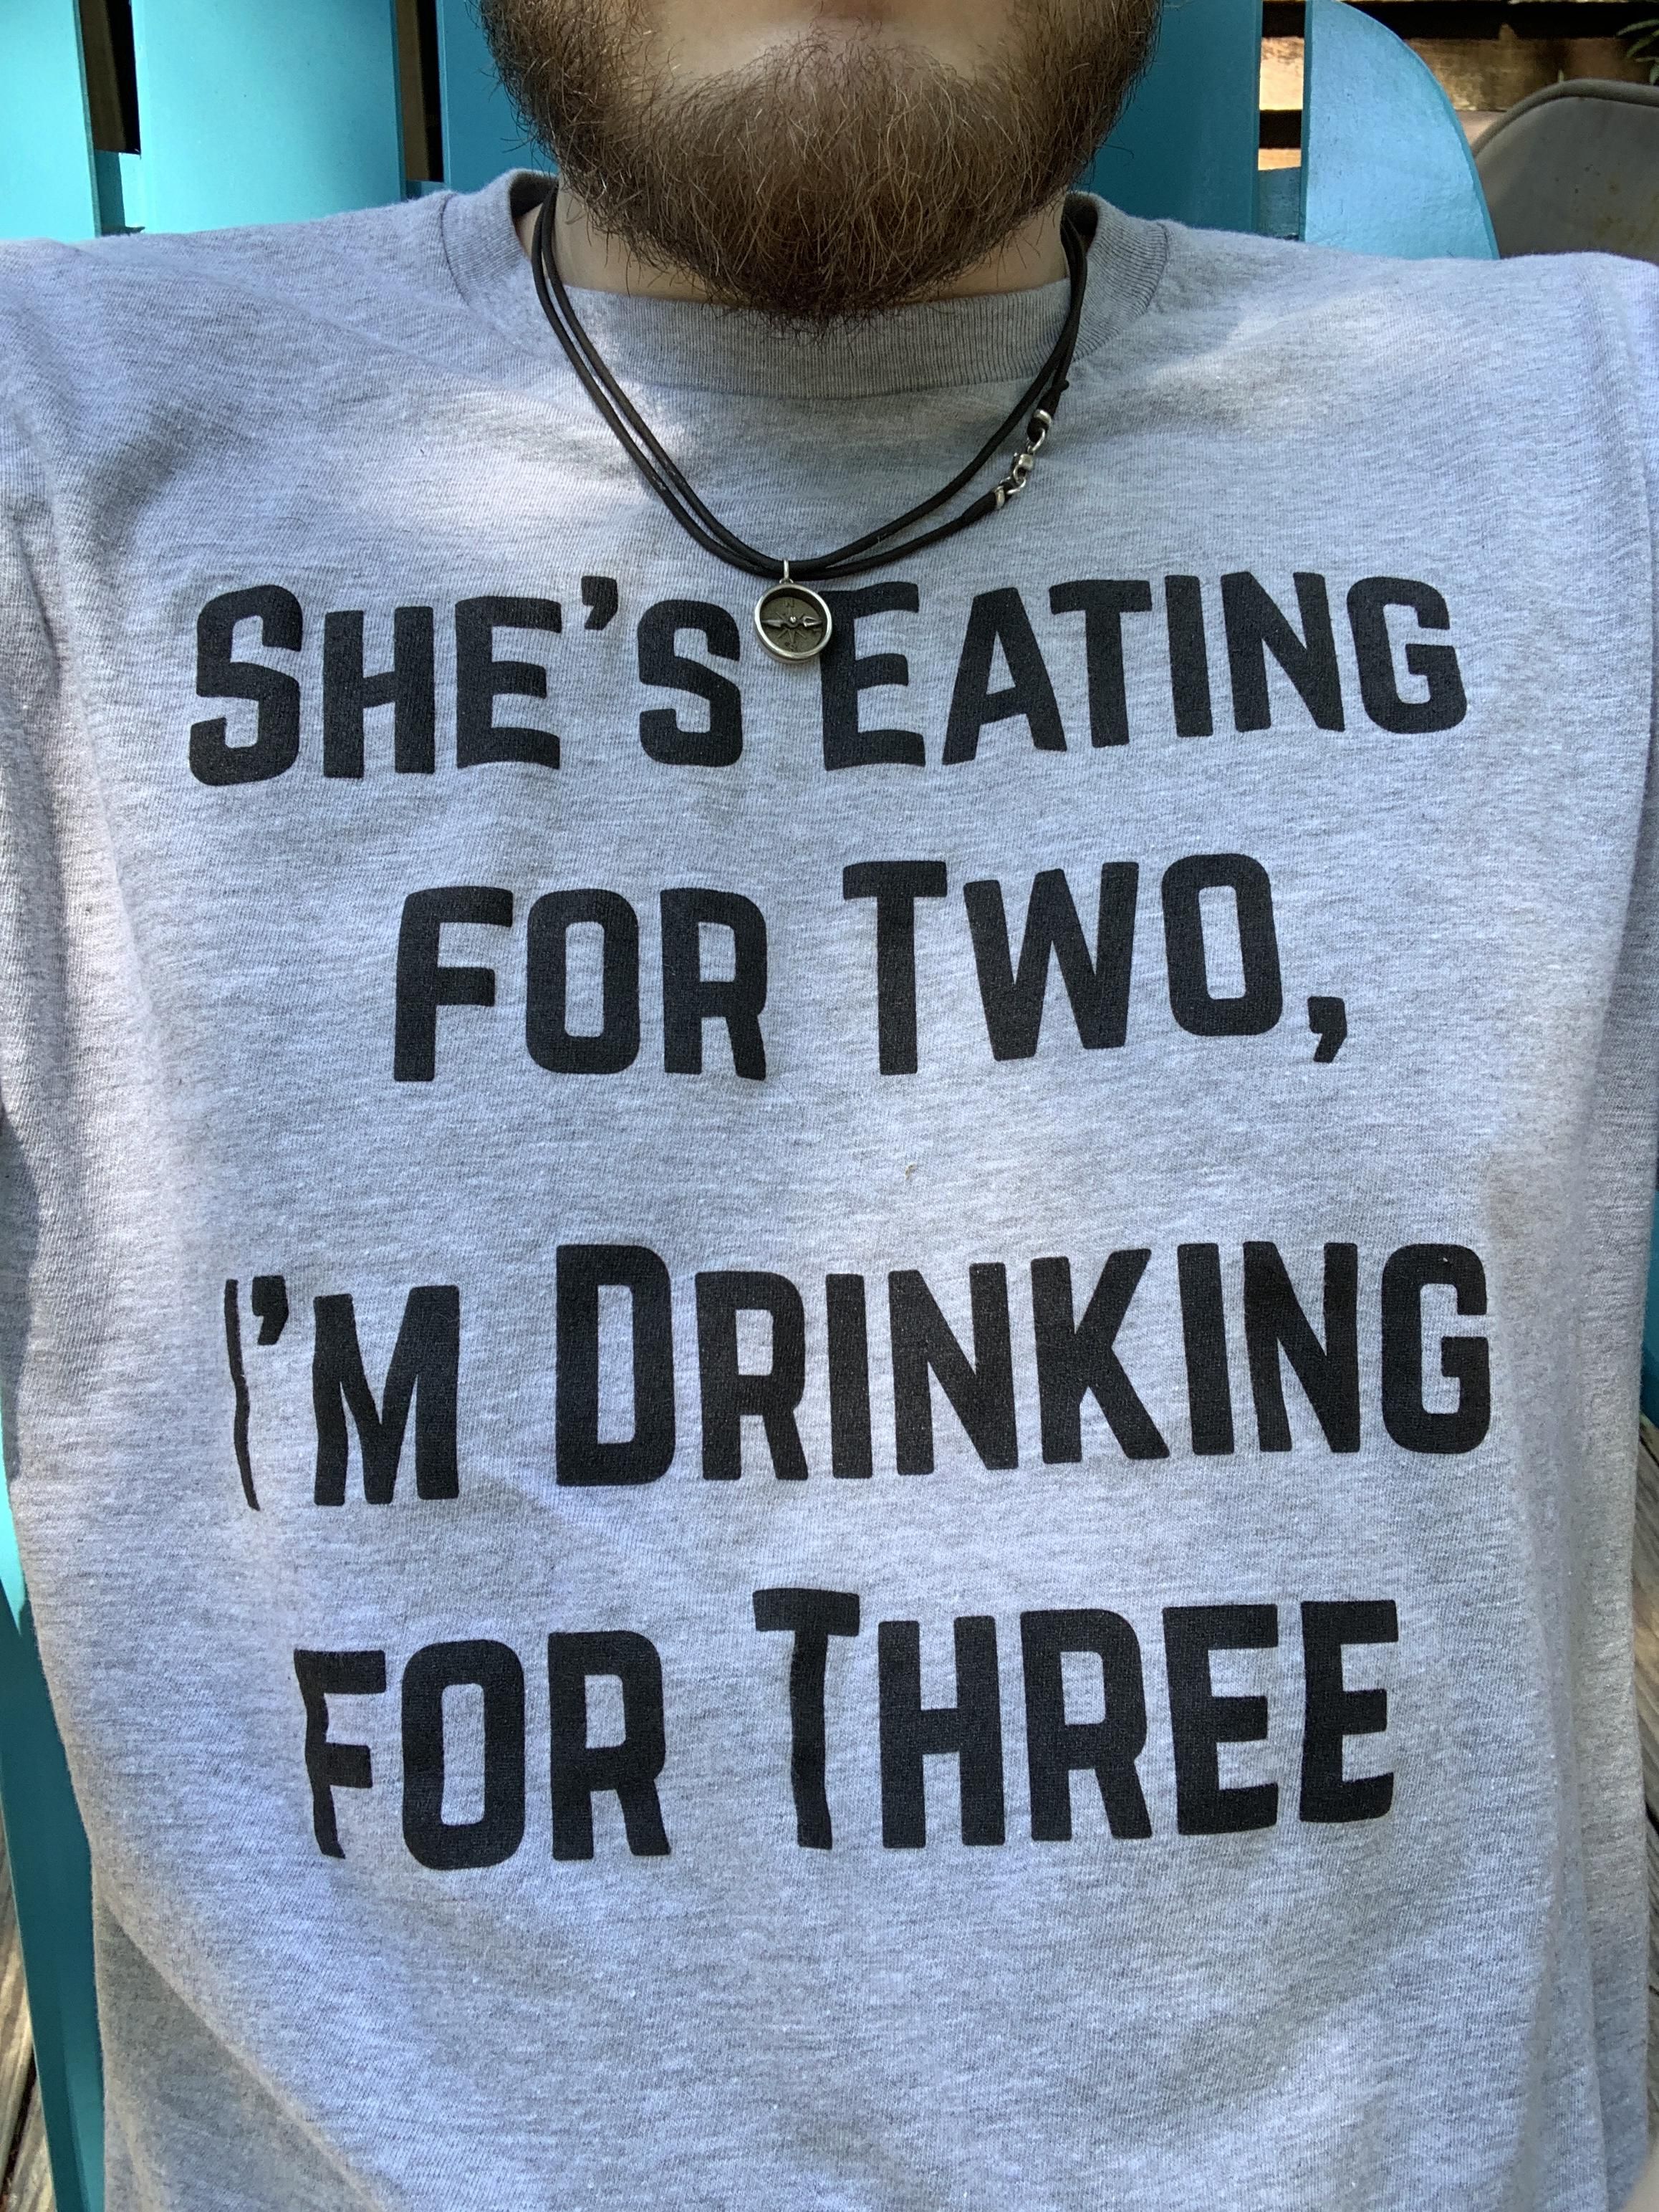 My soon to be Father’s Day shirt